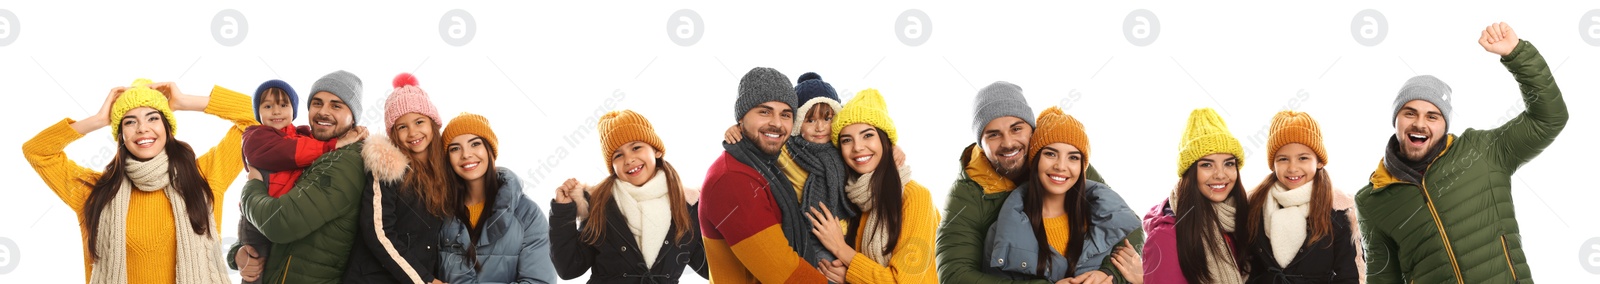 Image of Collage with photos of people wearing warm clothes on white background, banner design. Winter vacation